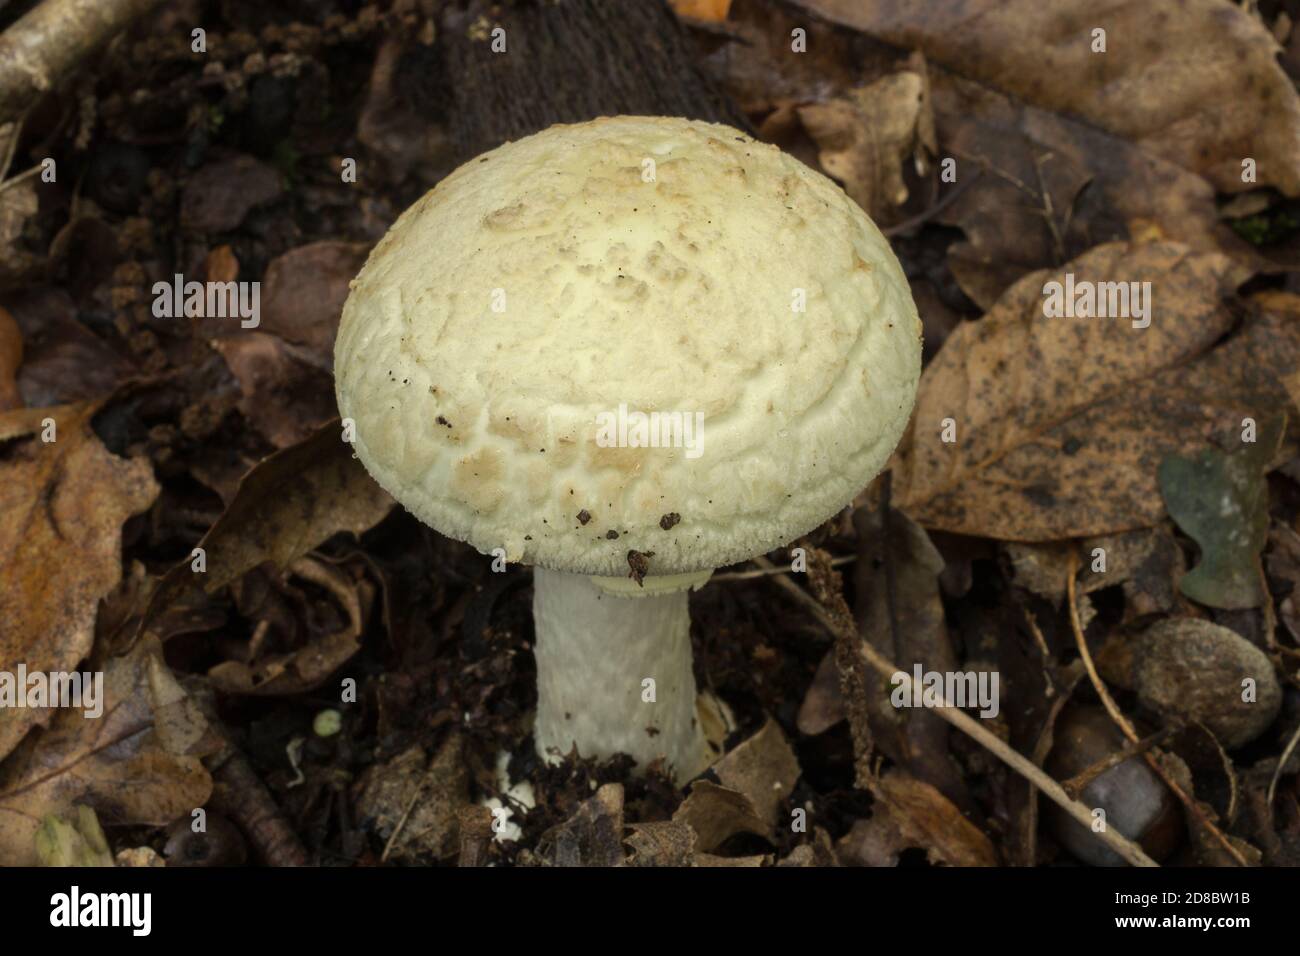 The death cap of amamita phalloides growing next to an ok tree in French woodland. Stock Photo